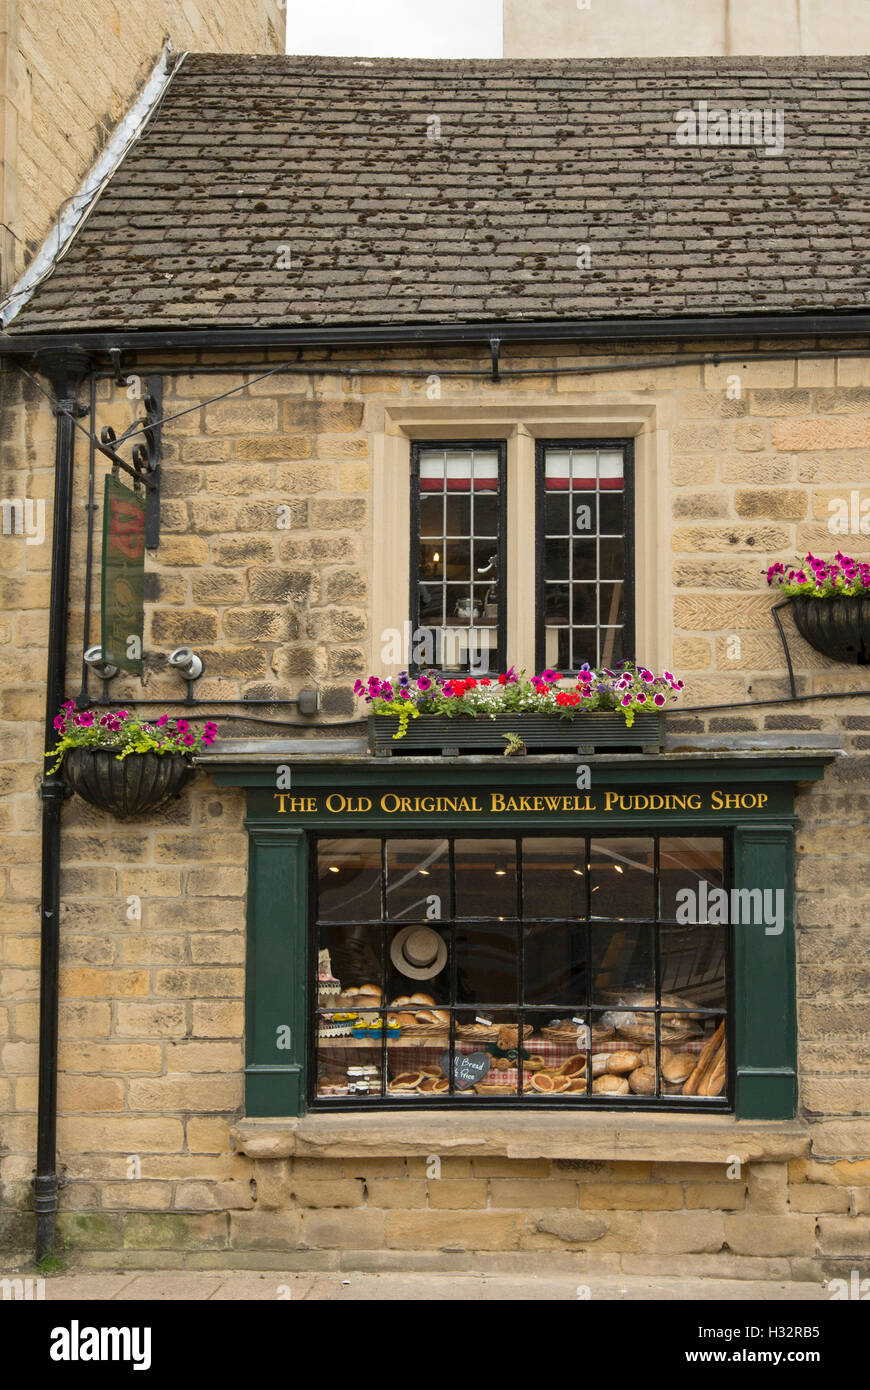 Historic Bakewell pudding shop in brown brick building with food products displayed in window in Derbyshire England Stock Photo